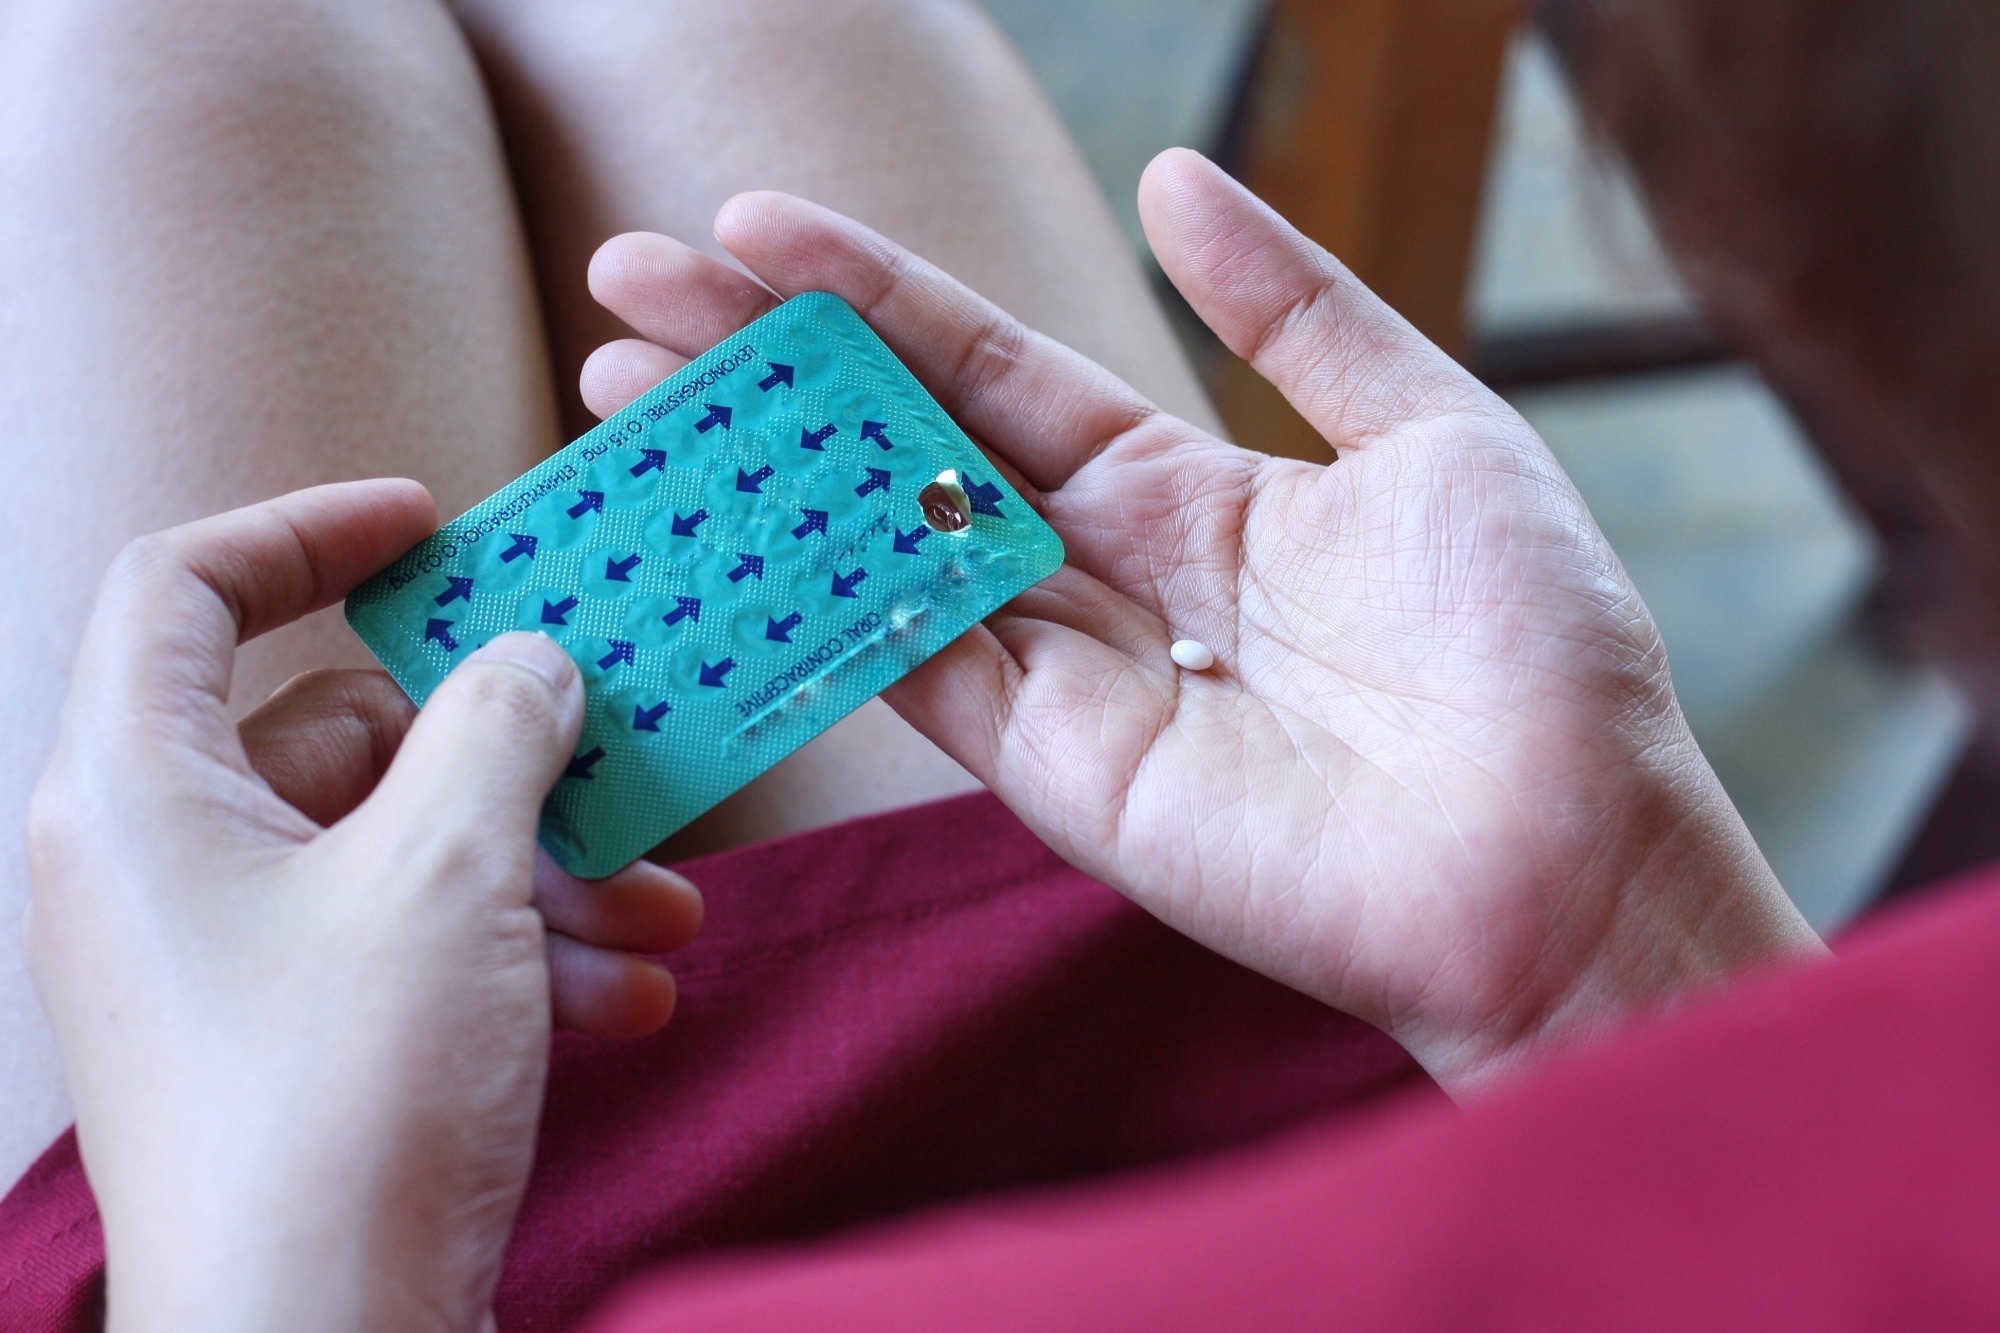 Study: Mental Health Symptoms in Oral Contraceptive Users During Short-Term Hormone Withdrawal. Image Credit: Kotcha K/Shutterstock.com